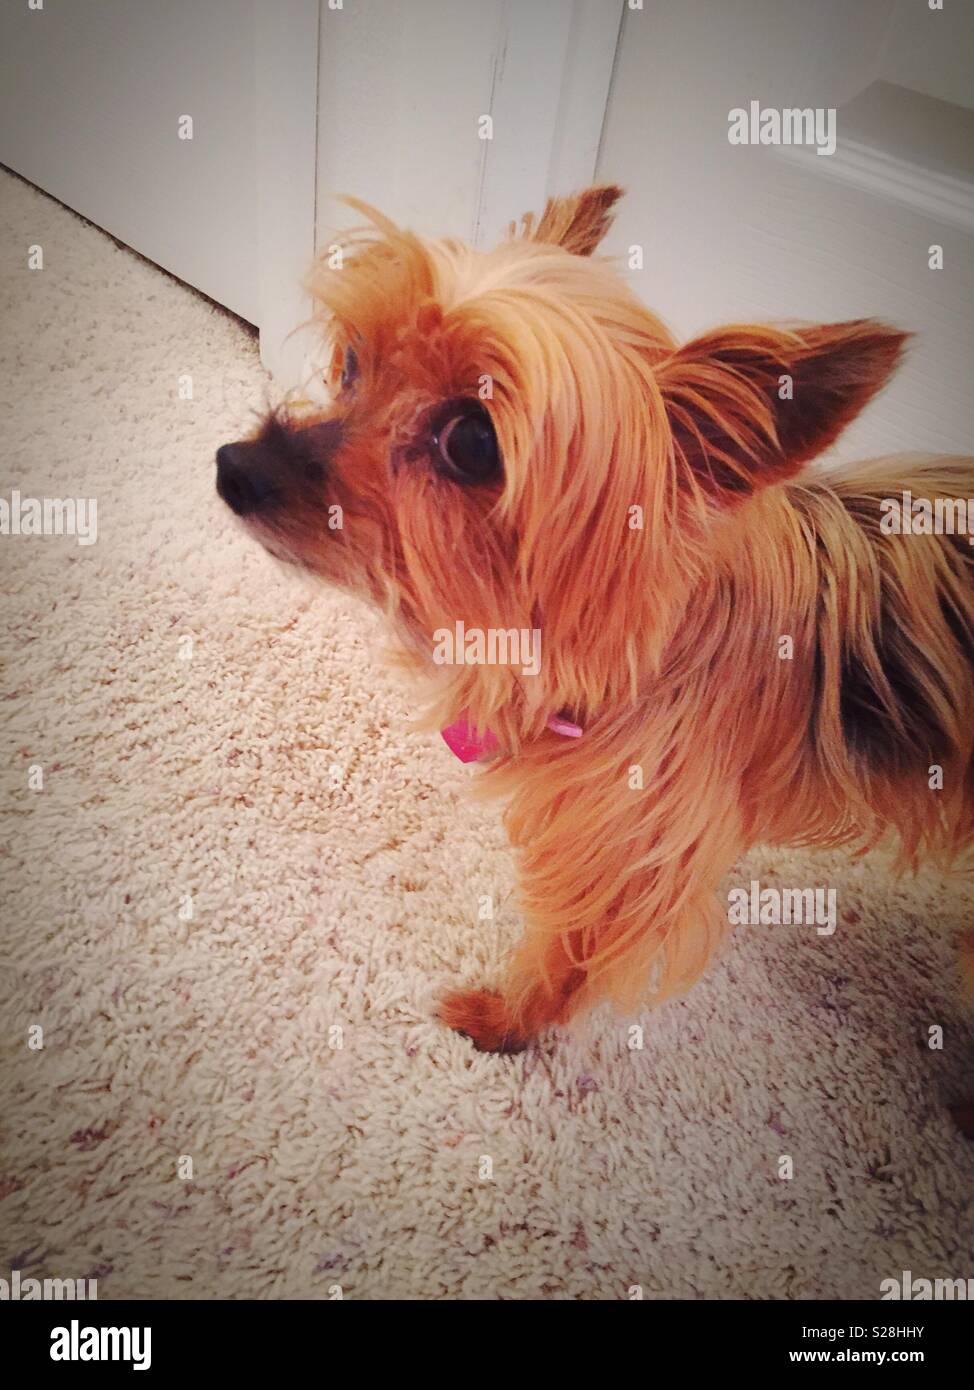 Yorkshire Terrier dog looking at camera, USA Banque D'Images